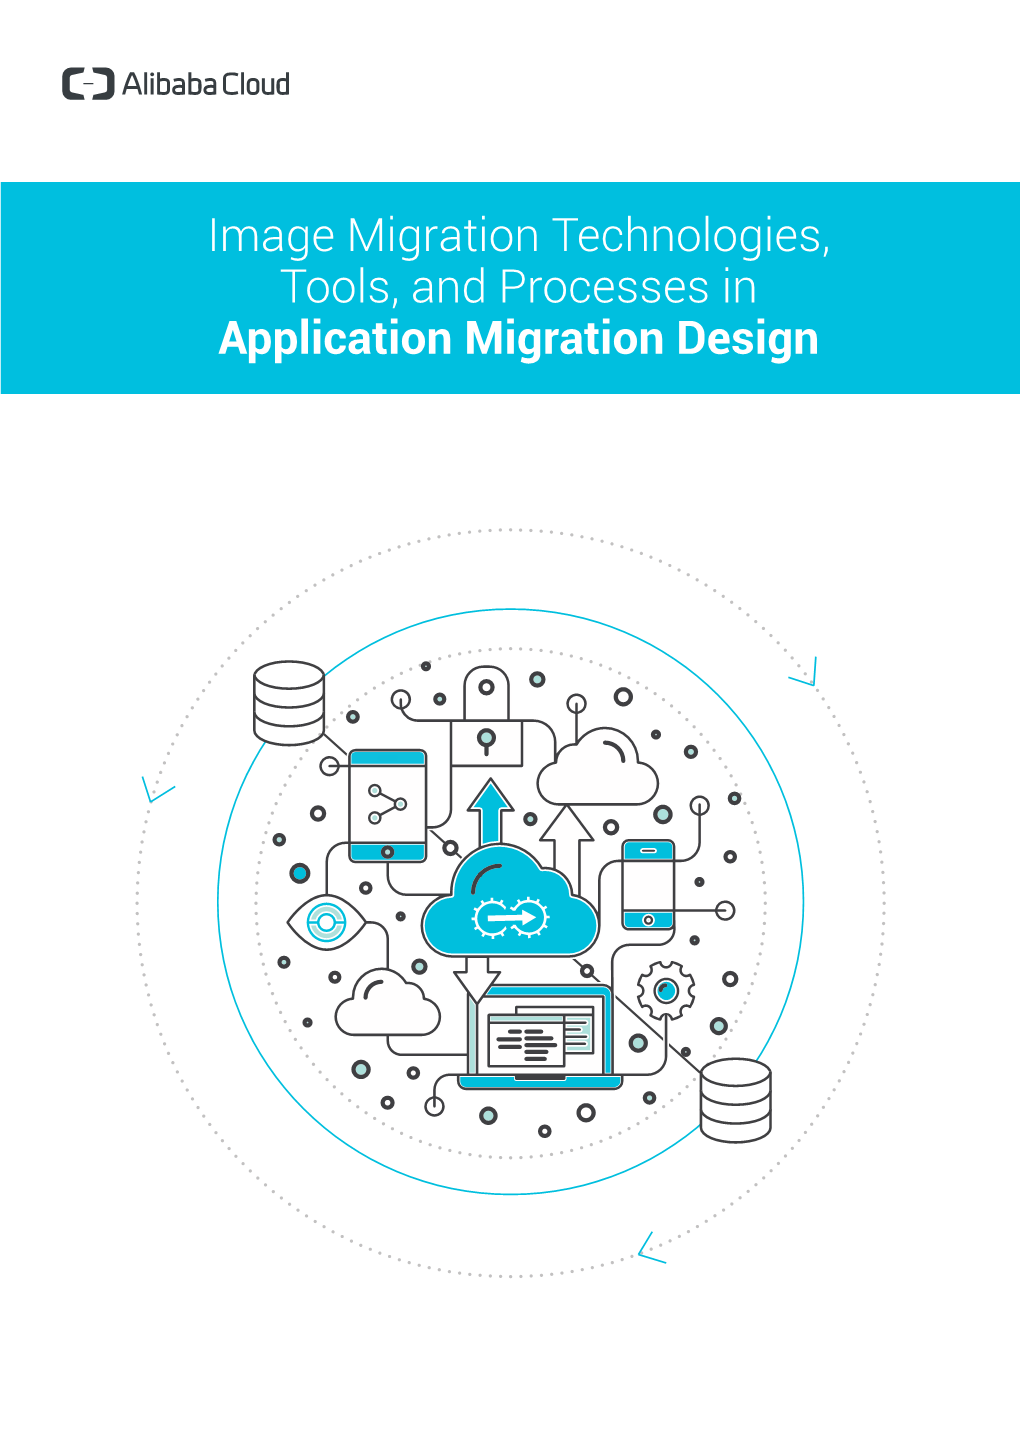 Image Migration Technologies, Tools, and Processes in Application Migration Design Image Migration Technologies, Tools, and Processes in Application Migration Design